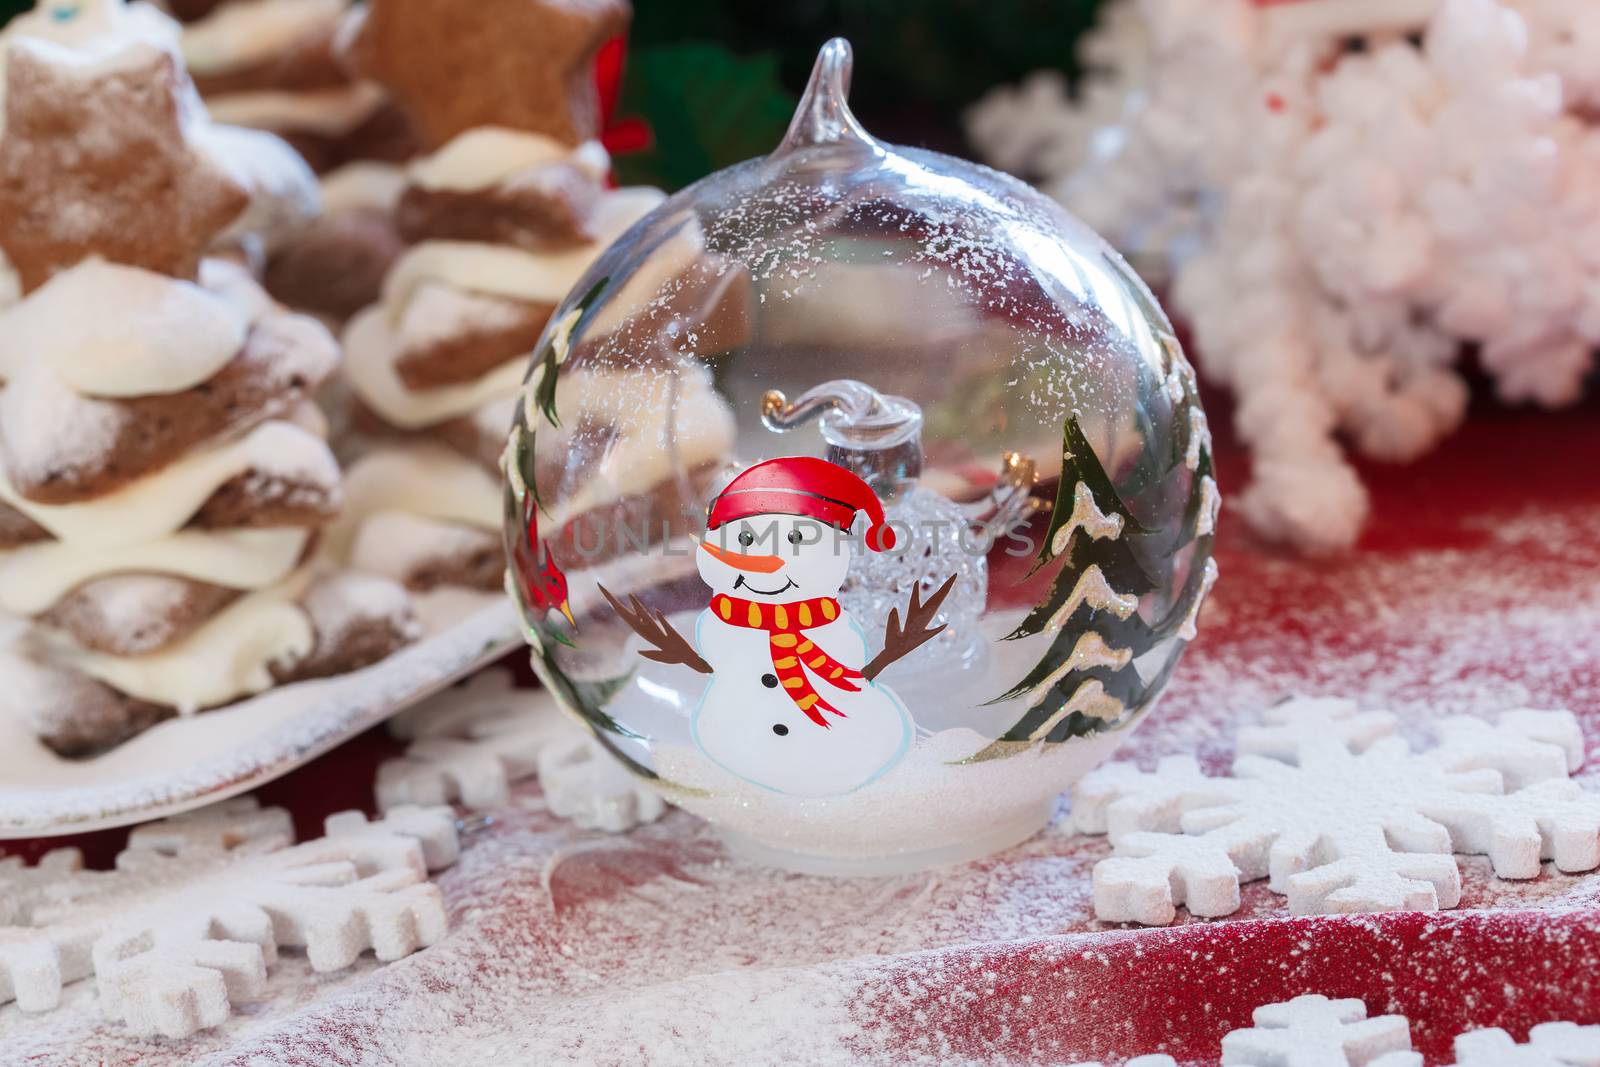 Glass Ball With Light Up Snowman Decoration against gingerbread Christmas tree on festive table